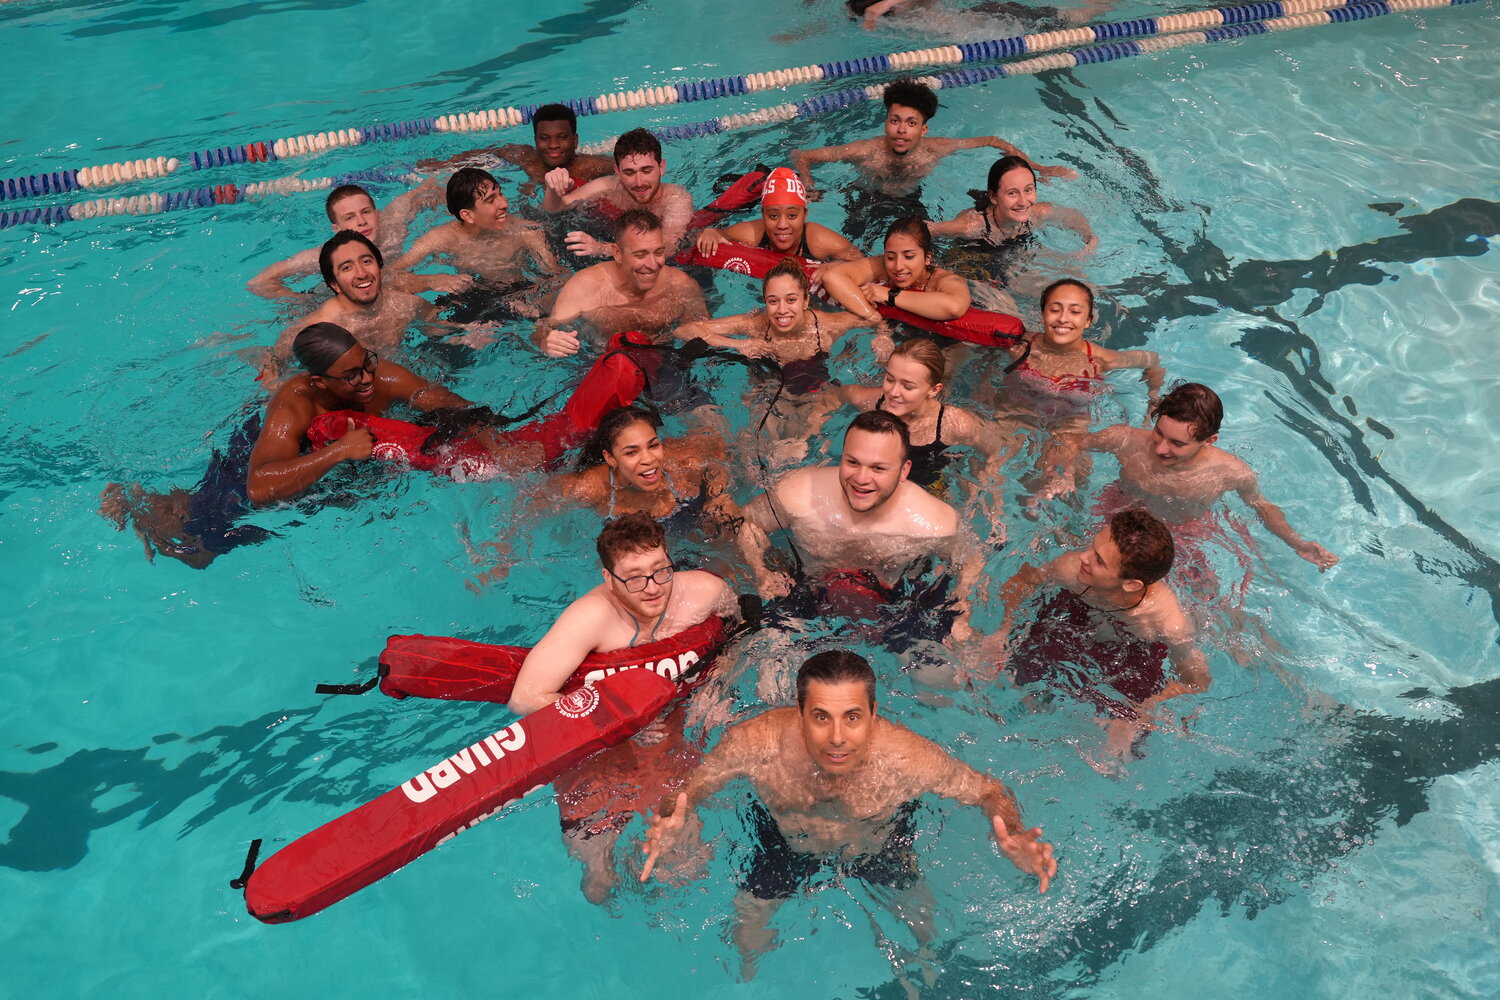 As summer in Freeport comes to a close, Tom Arena, the Freeport Recreation Center’s aquatics coordinator, and his dedicated lifeguard team have been unwavering in their commitment to ensuring the safety of swimmers across the community’s pools.